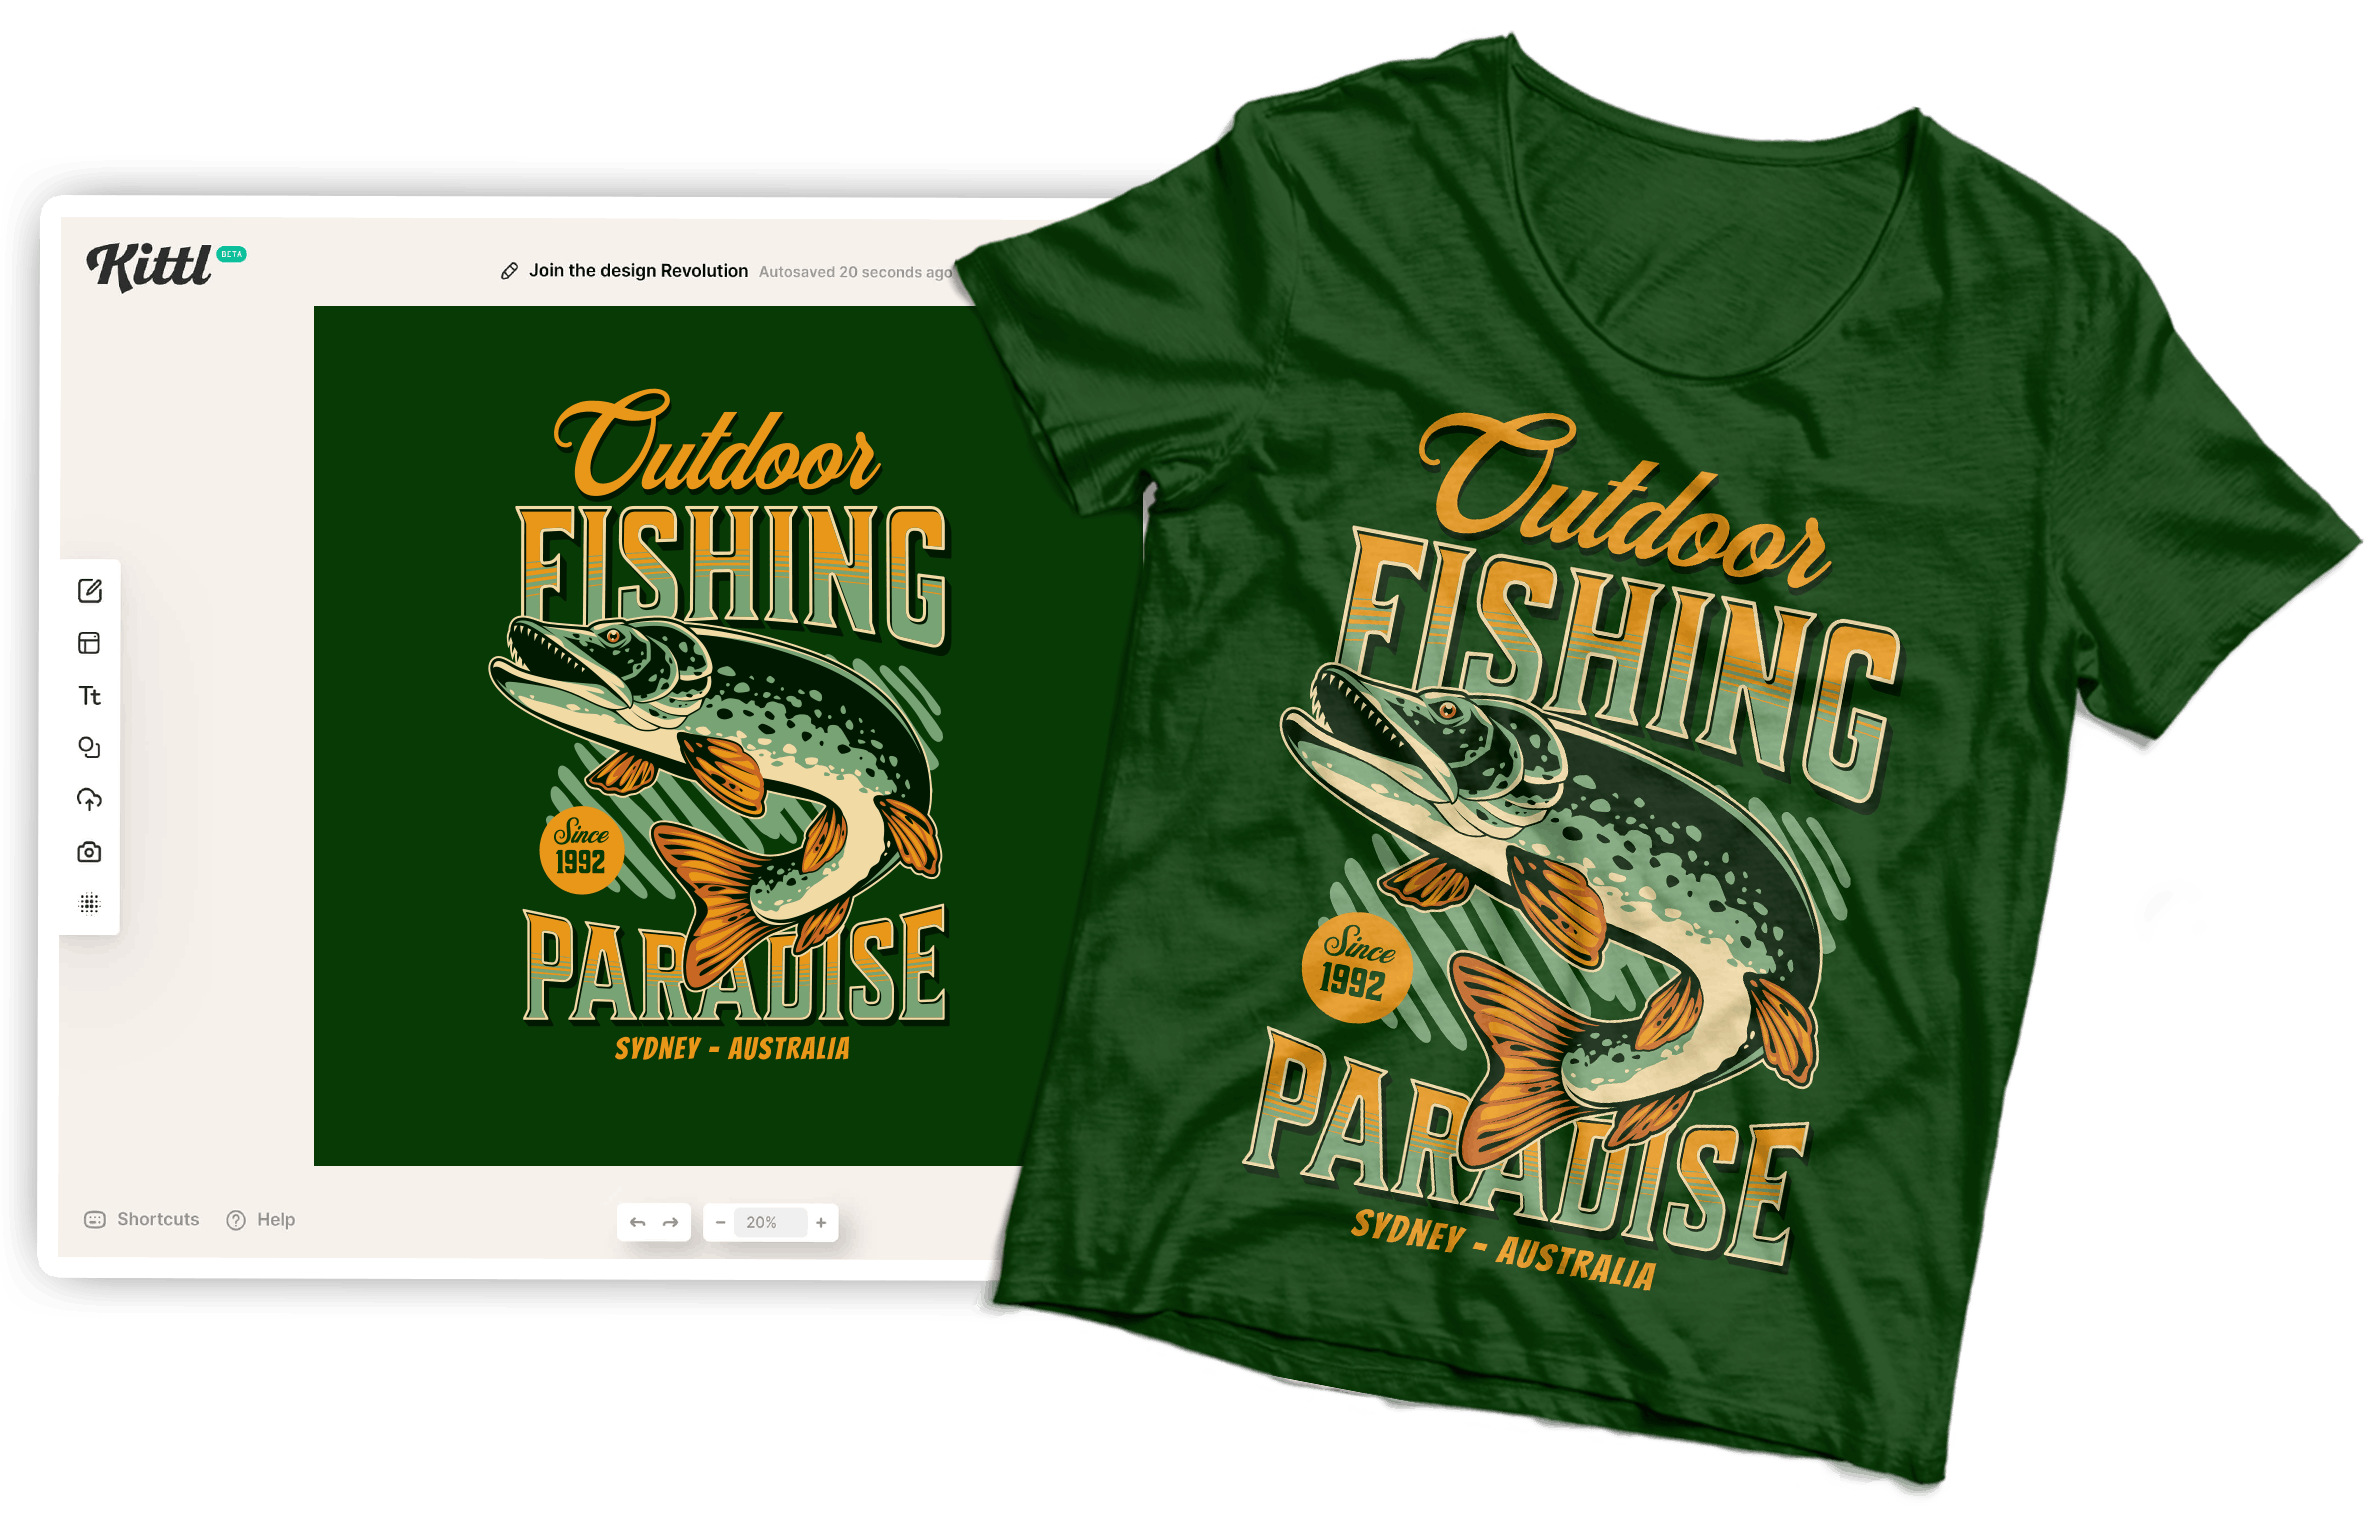 Outdoor Fishing Paradise design from Kittl to T-Shirt.